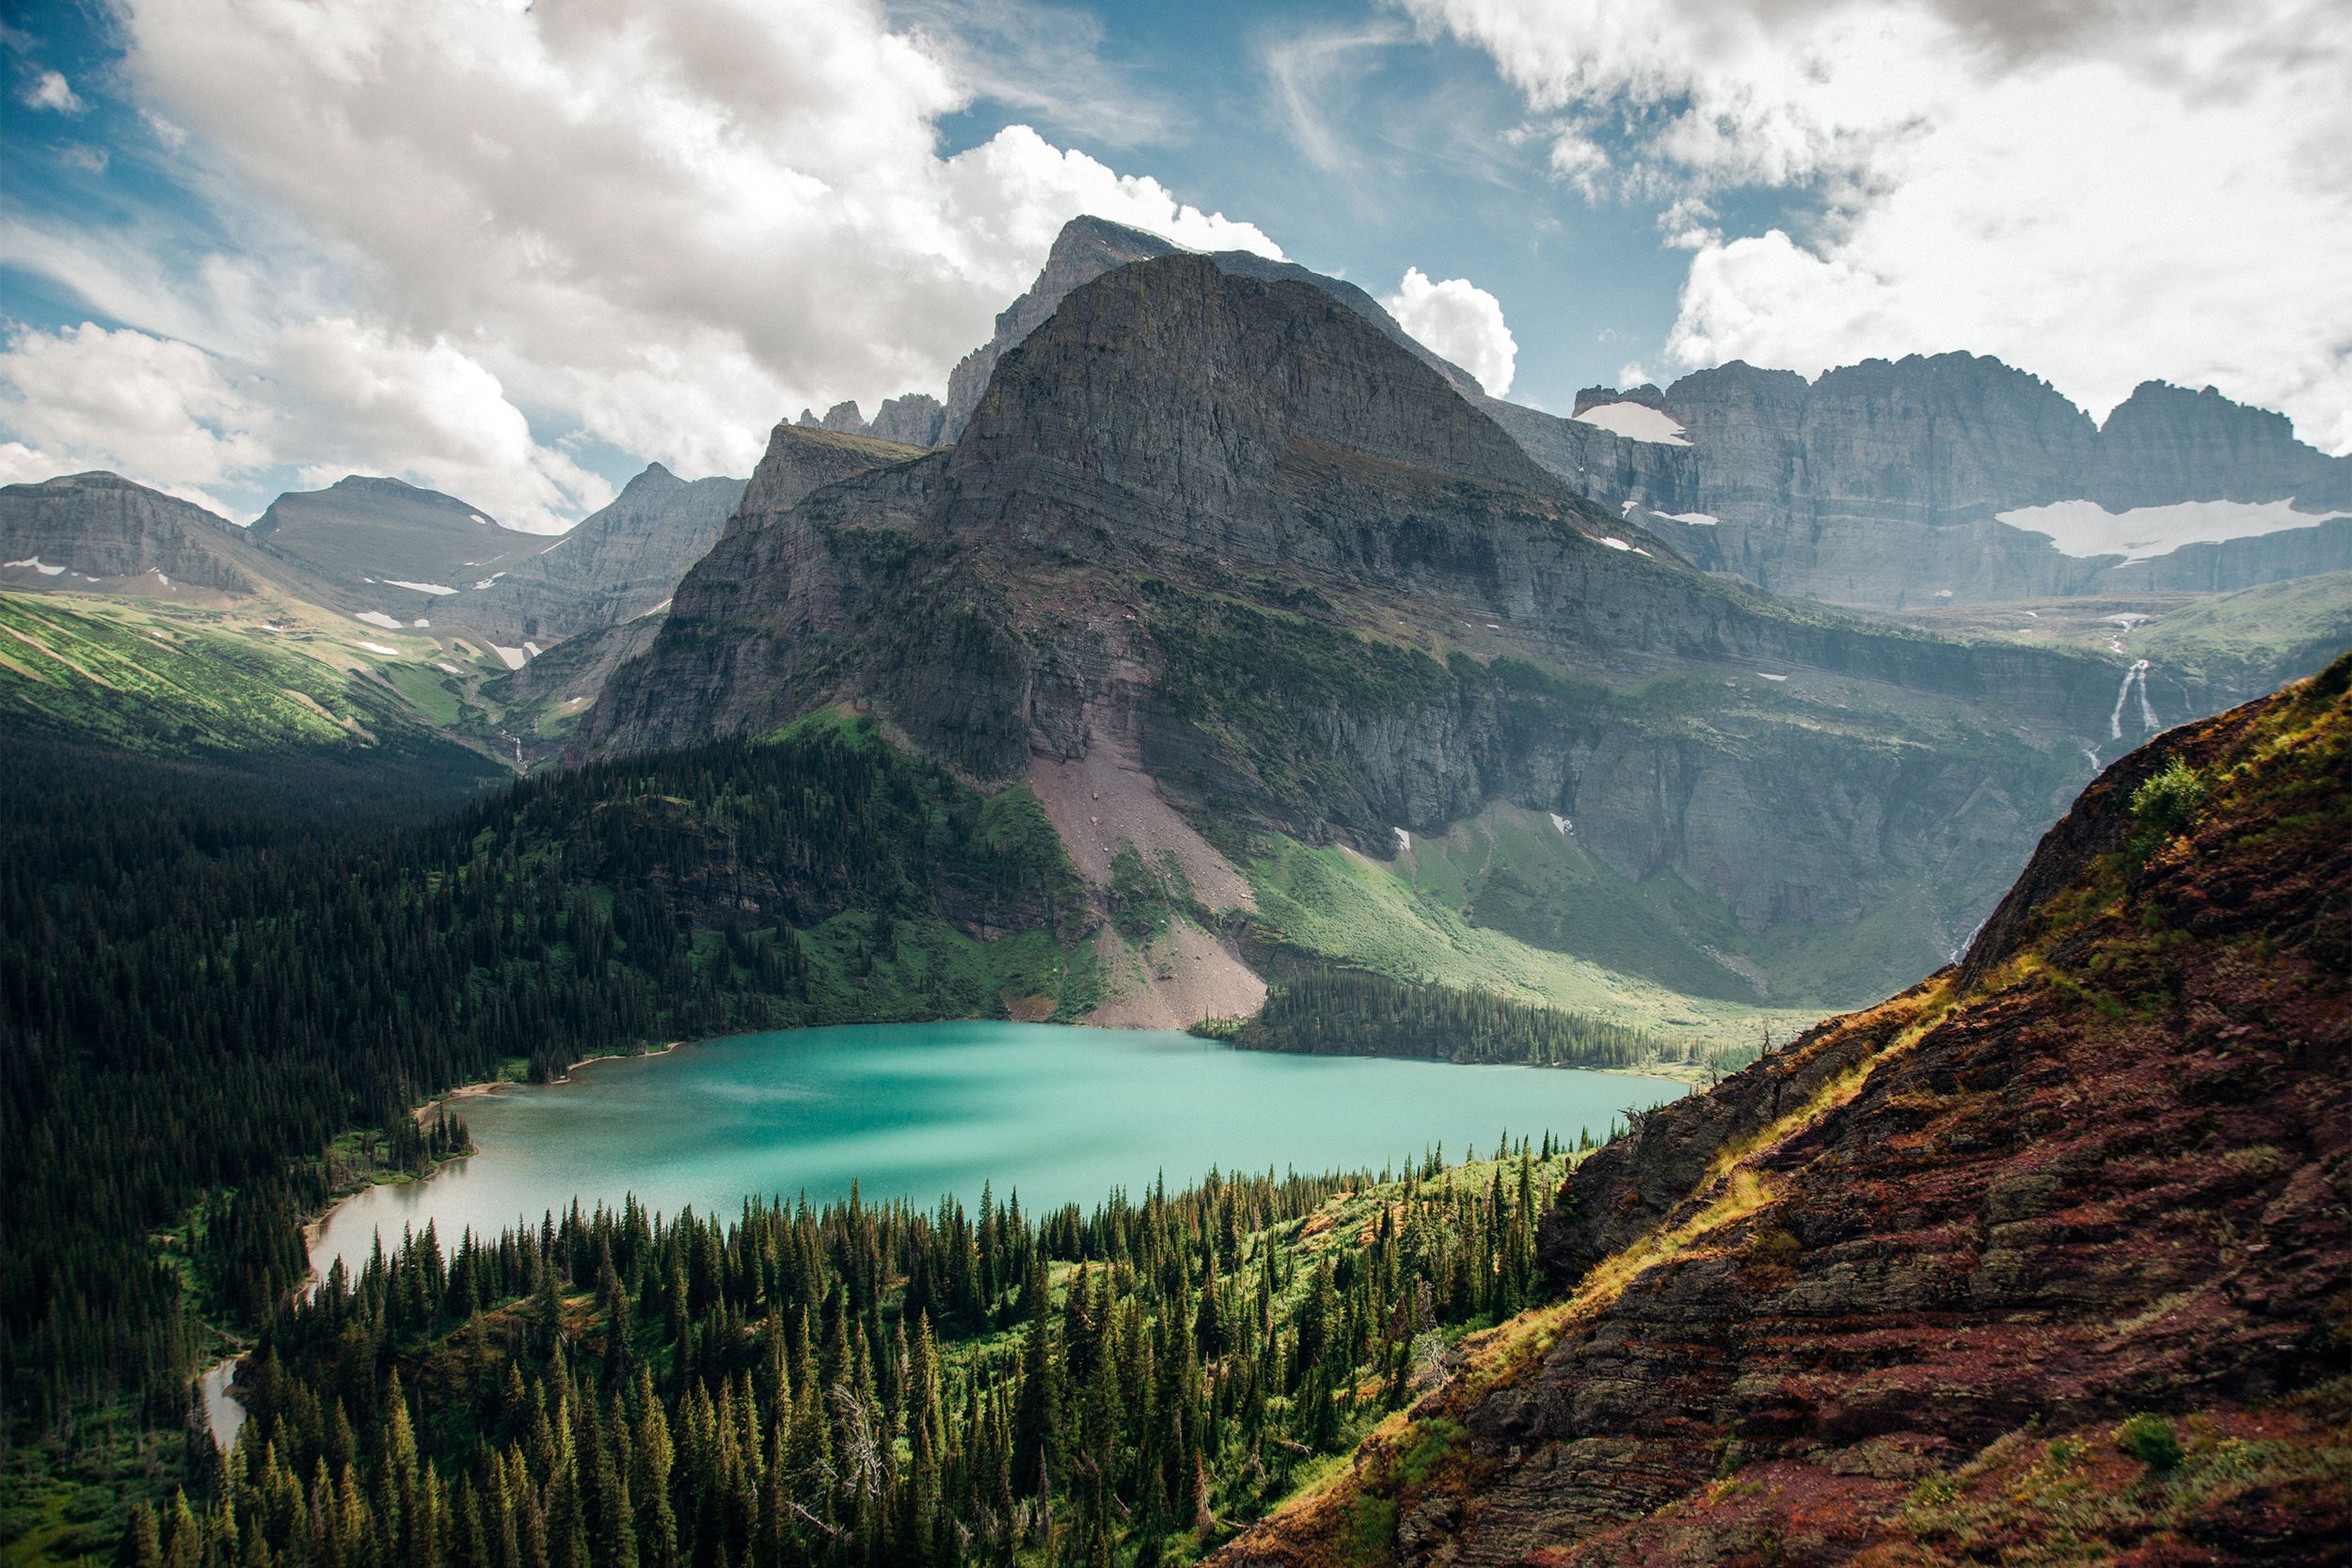 <p>Named a national park in 1910, <a href="https://www.nps.gov/glac/index.htm">Glacier National Park</a> has about 25 active glaciers dispersed among its 1 million acres and is home to "Going-to-the-Sun Road," a 50-mile drive said to offer some of the most unforgettable views in Montana. Other park highlights include pristine forests, alpine meadows, and lakes. </p><p><b>Related:</b> <a href="https://blog.cheapism.com/cheap-national-park-vacations/">Money-Saving Tips for Visiting National Parks </a></p>